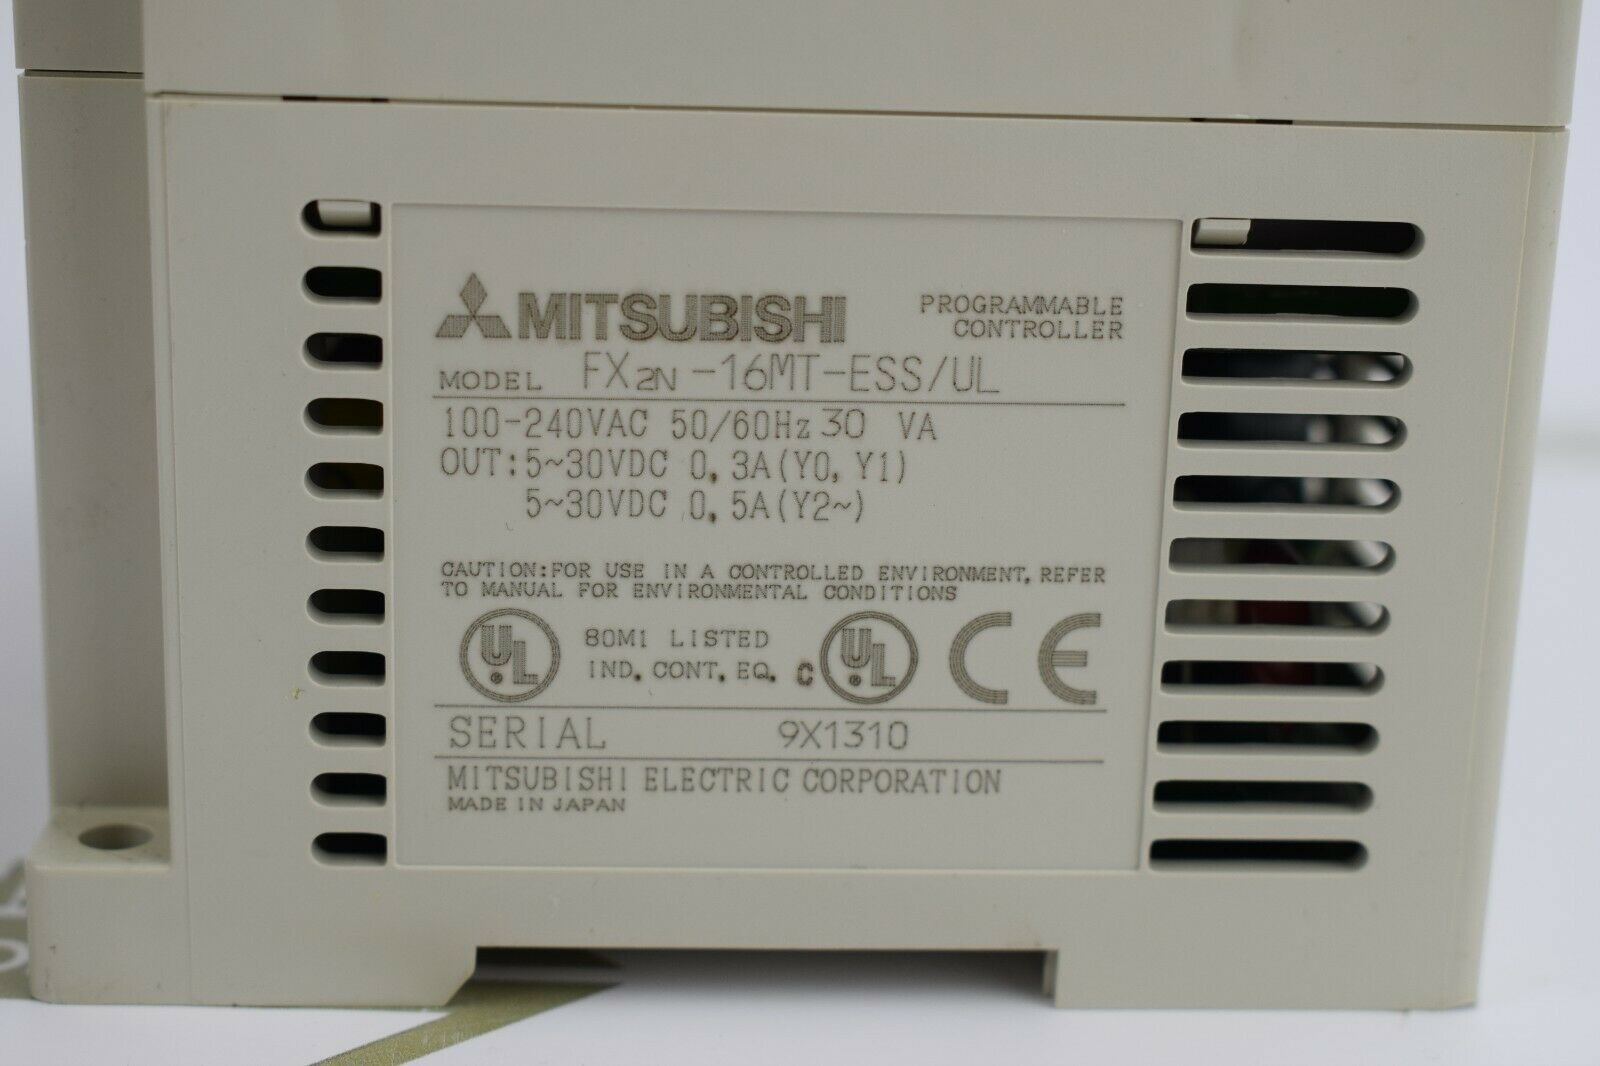 Mitsubishi Electric Programmable Controller FX2N-16MT-ESS/UL 